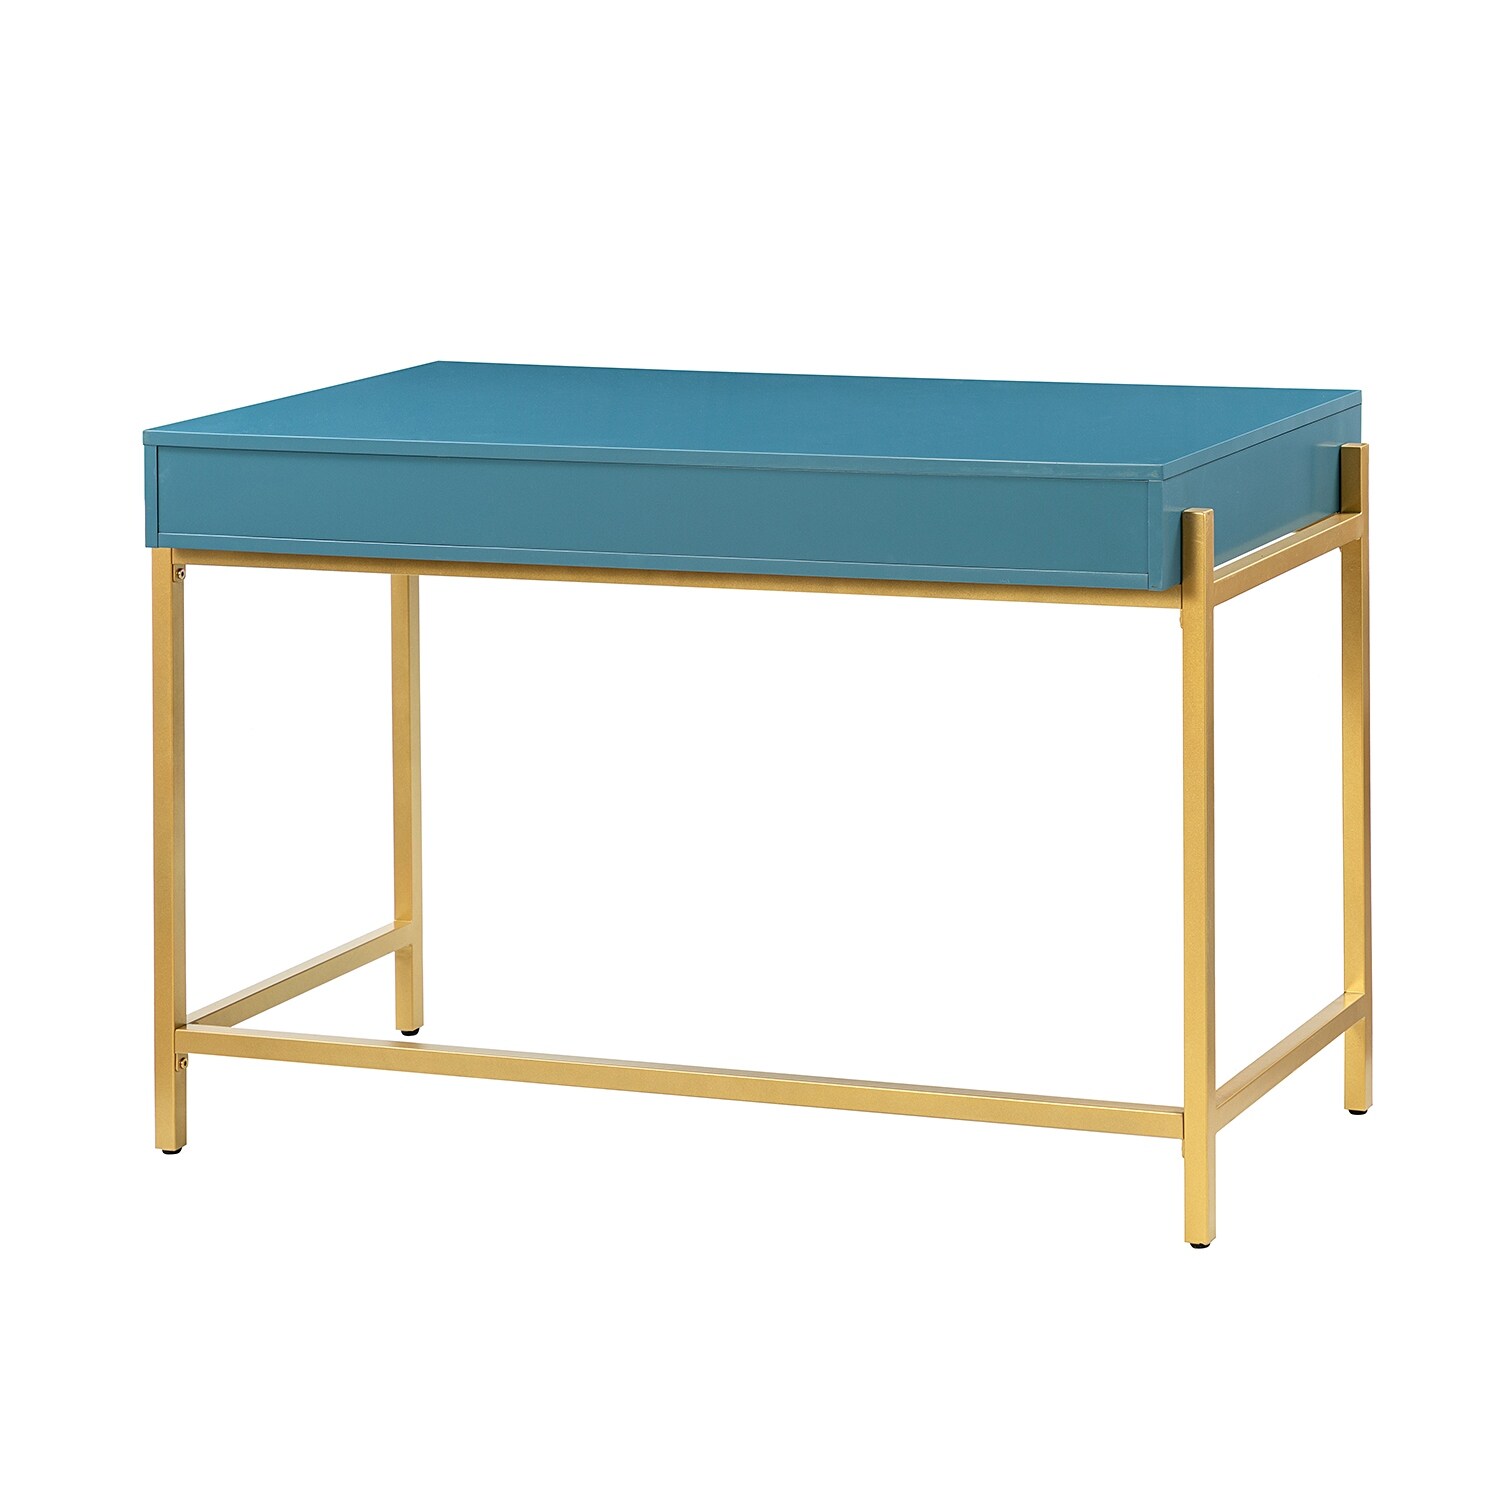 https://ak1.ostkcdn.com/images/products/is/images/direct/5146d699cafcdafe93881f245488c3e4de91055e/Saliva-Writing-Desk-with-Golden-Base-for-Office.jpg